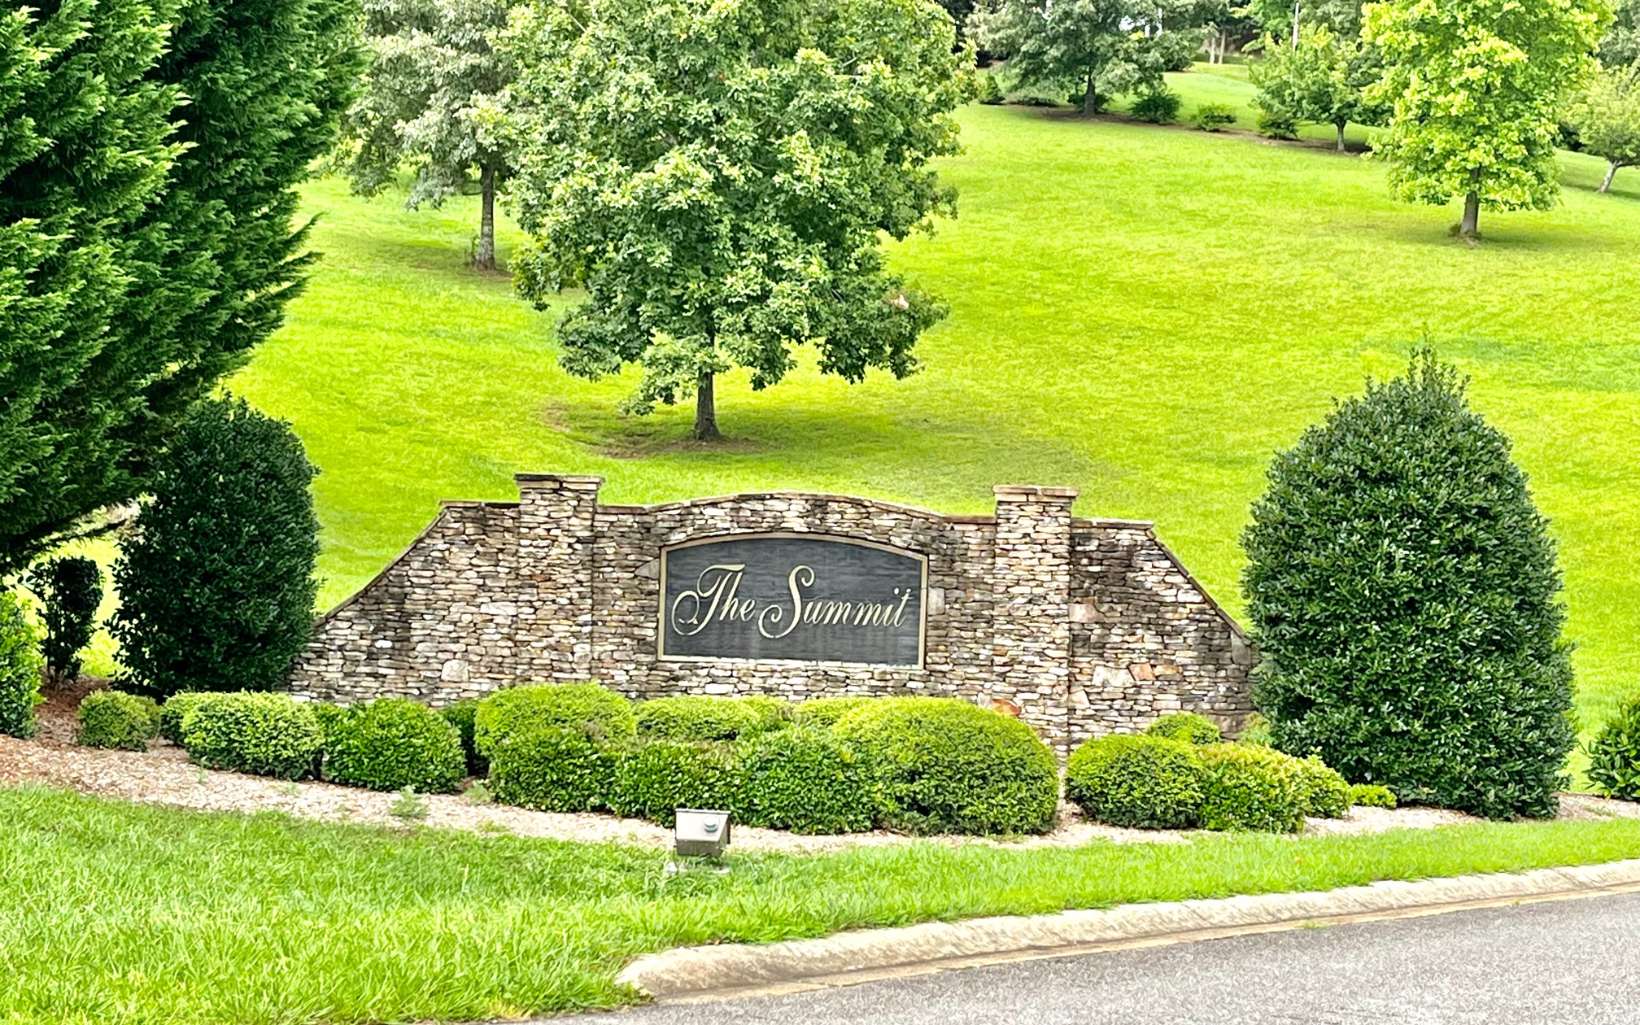 Have you been searching for the perfect lot to build your long awaited mountain home on? Come check out The Summit located in beautiful Union County. Underground utilities and all paved access and this lot is located on a quite cul de sac. Conveniently located between Blairsville and Blue Ridge. Come check out THE SUMMIT and you will like you have come home to the mountains.